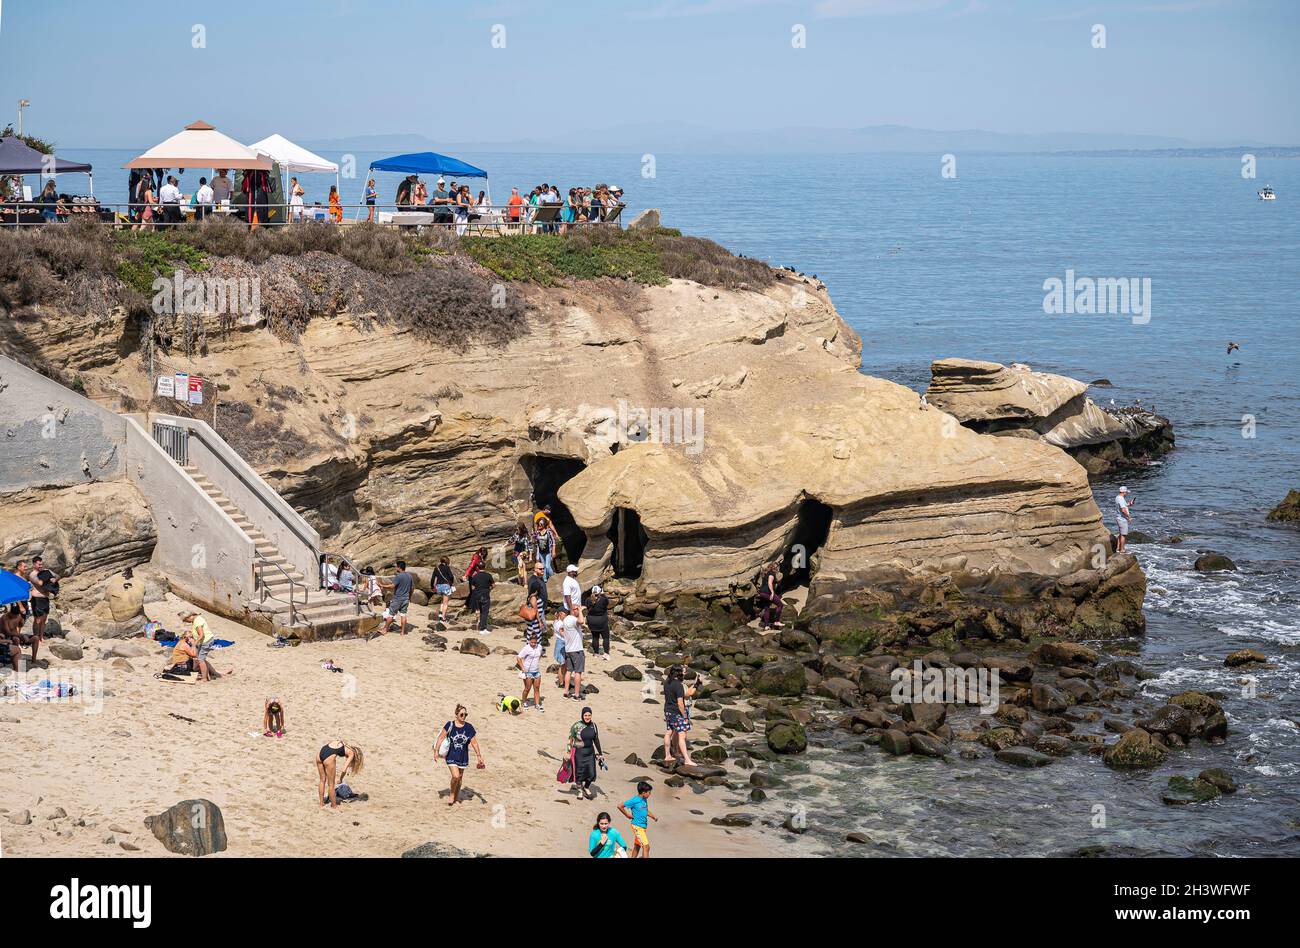 La Jolla, California, USA - October 3, 2021: La Jolly cove beach with dark caves in beige stone rocky cliffs at ocean water with plenty of people arou Stock Photo